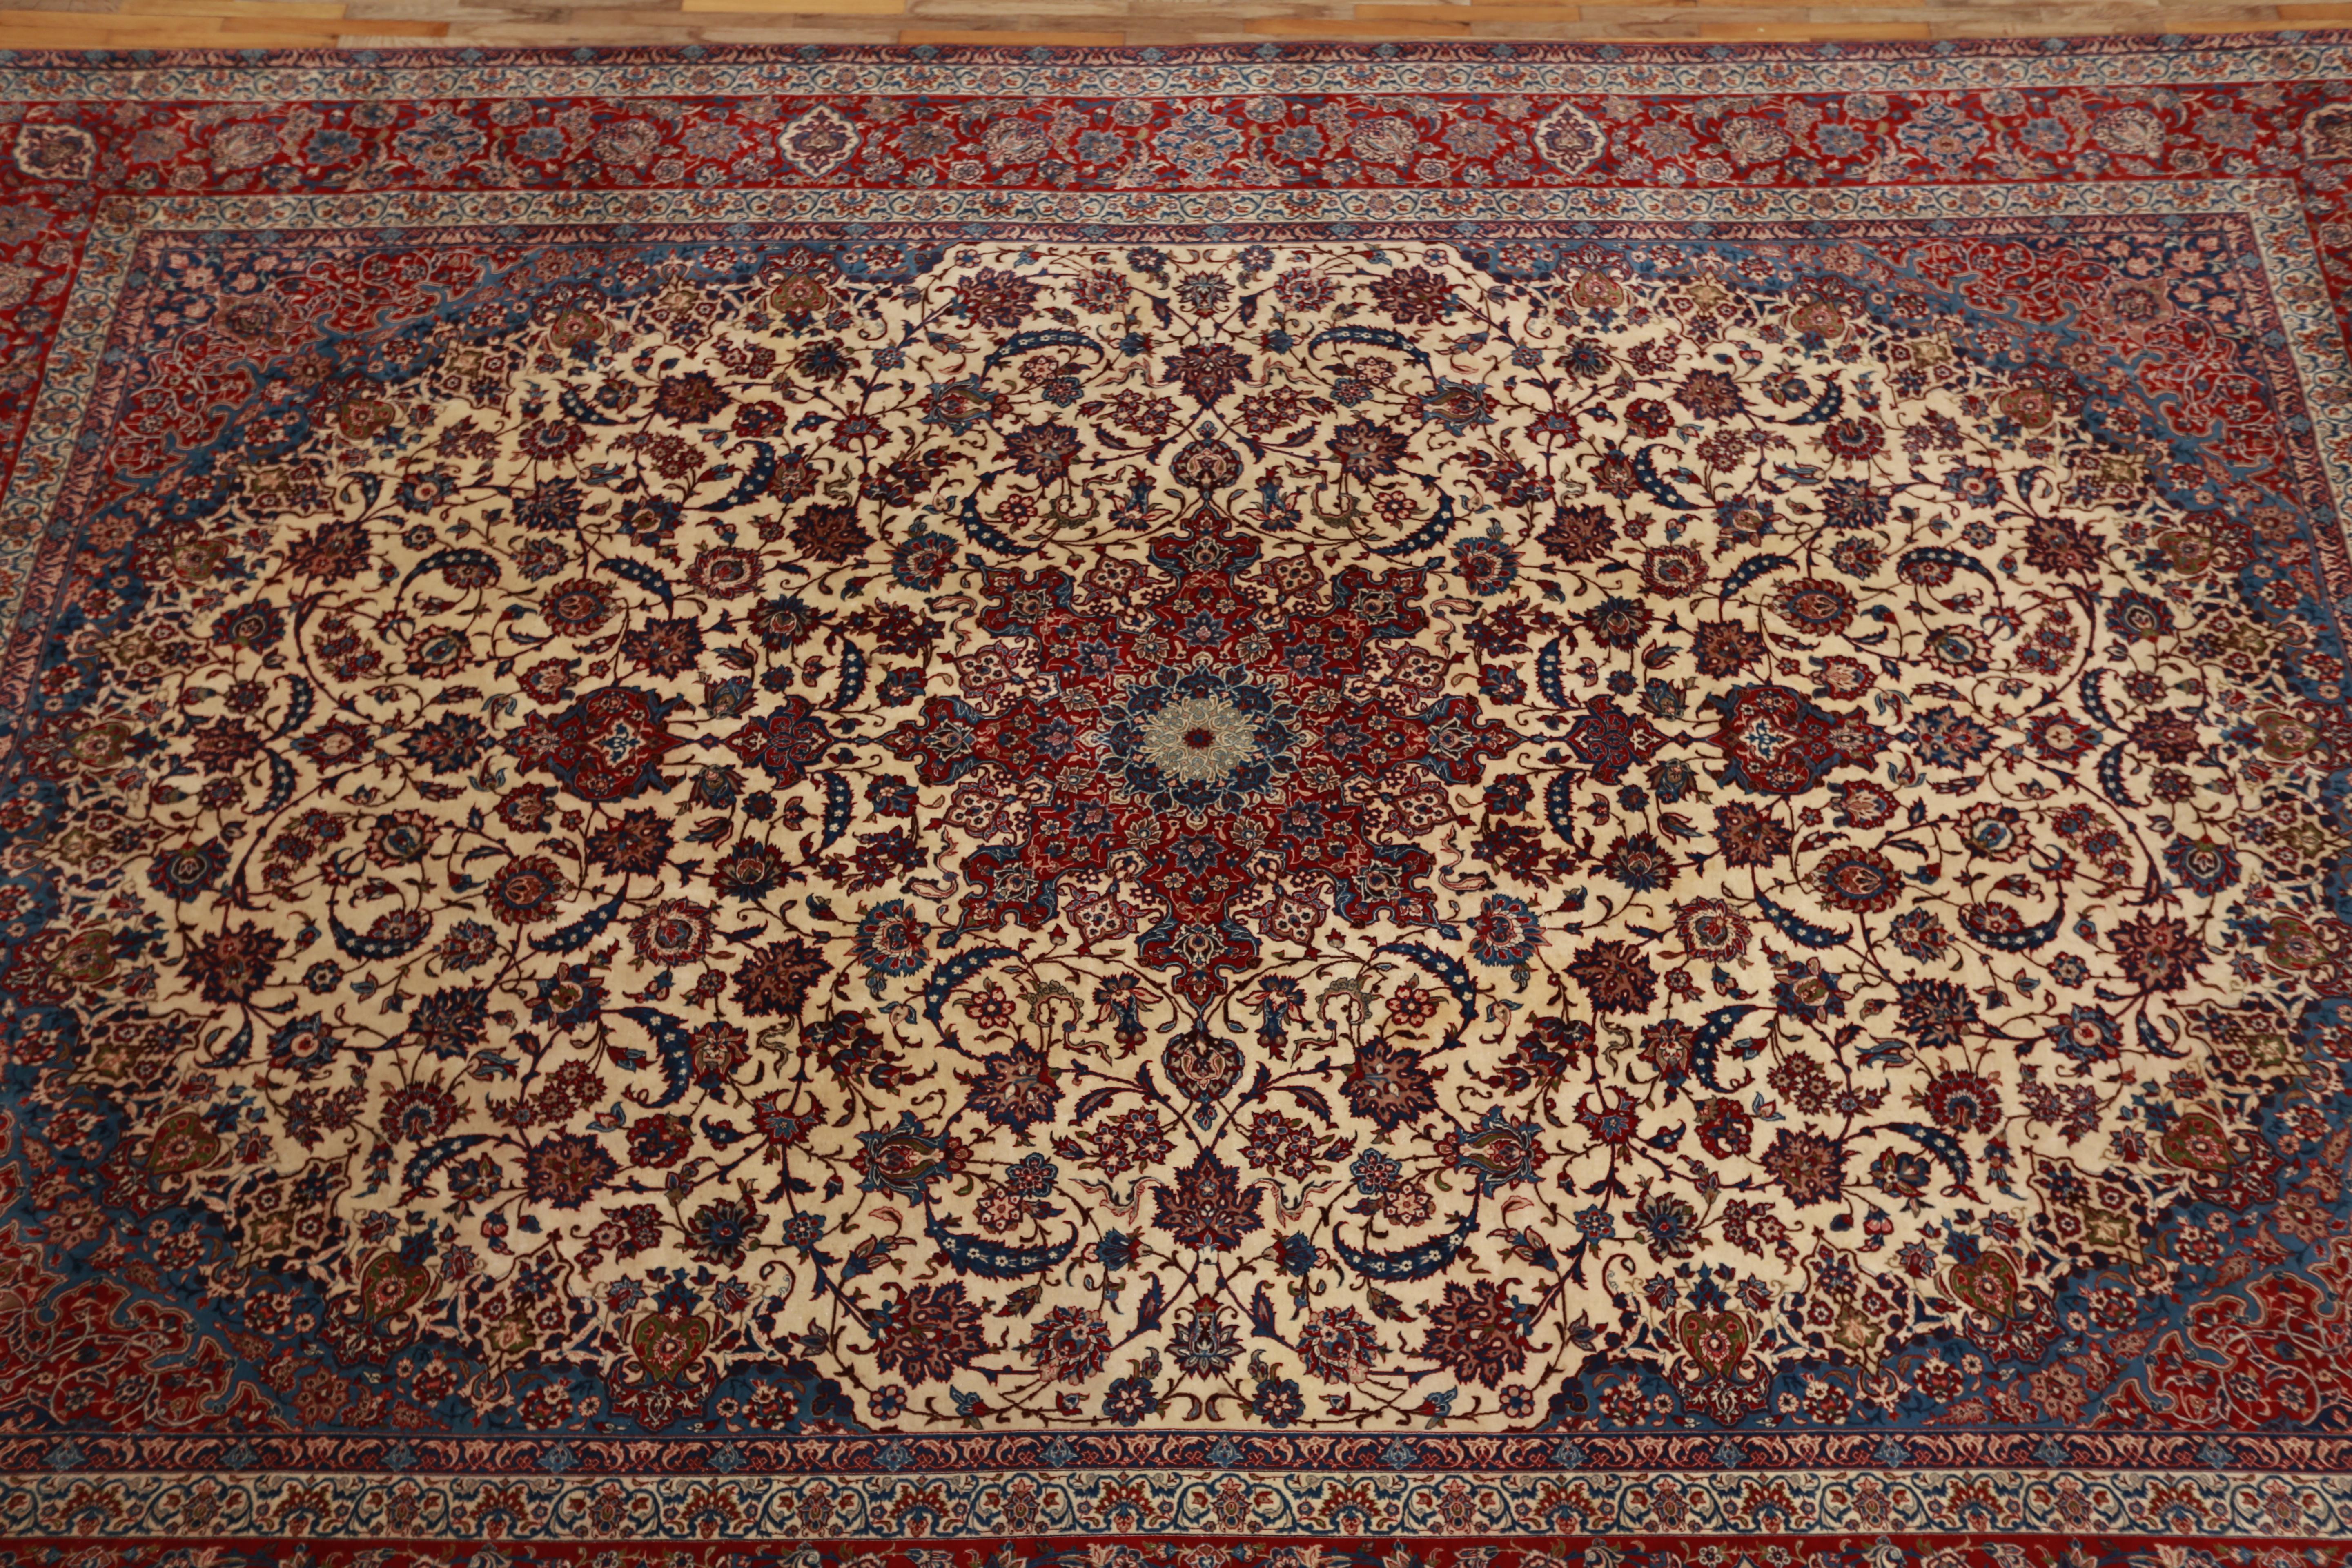 Hand-Knotted Isfahan Persian carpet 400 X 260 cm million knots per m2 For Sale